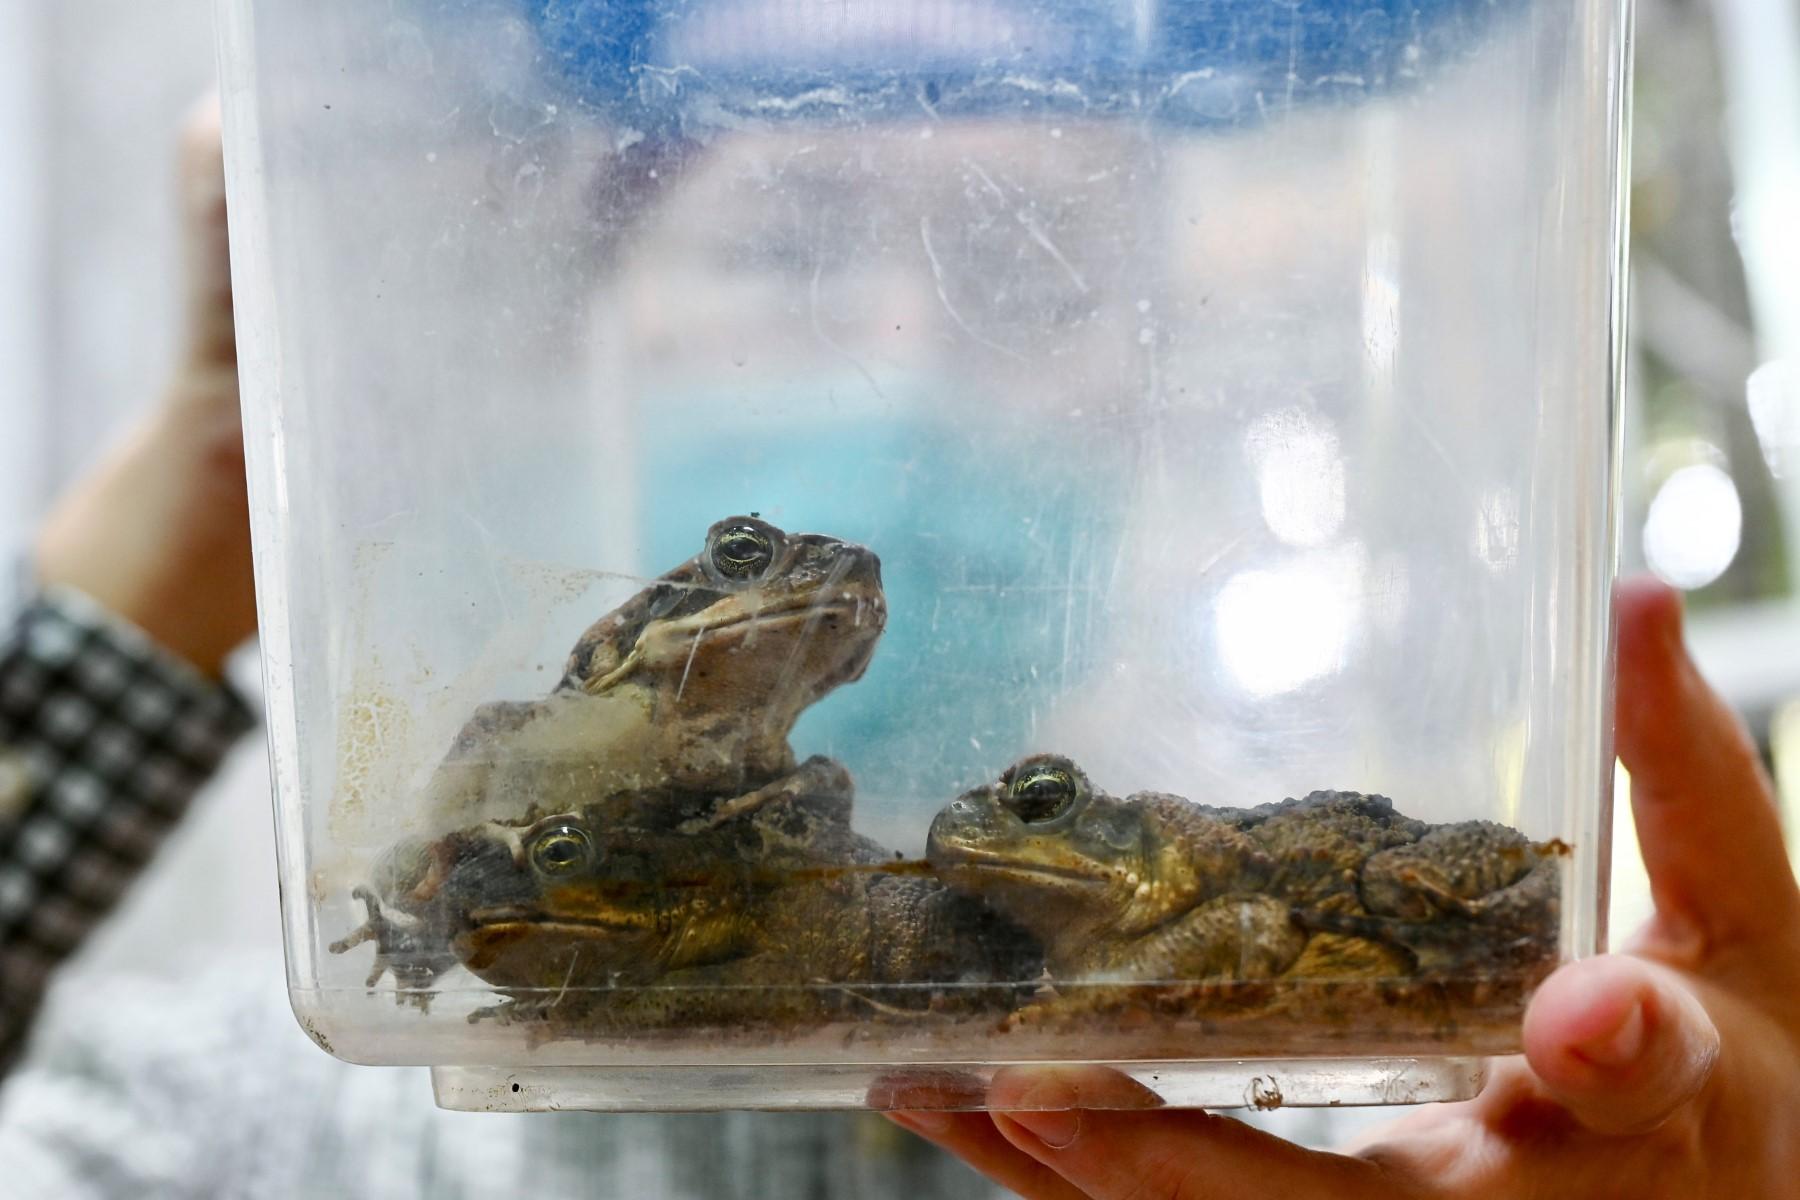 This picture taken on Nov 24, shows a container of cane toads at the government-run Endemic Species Research Institute in Nantou County. Photo: AFP